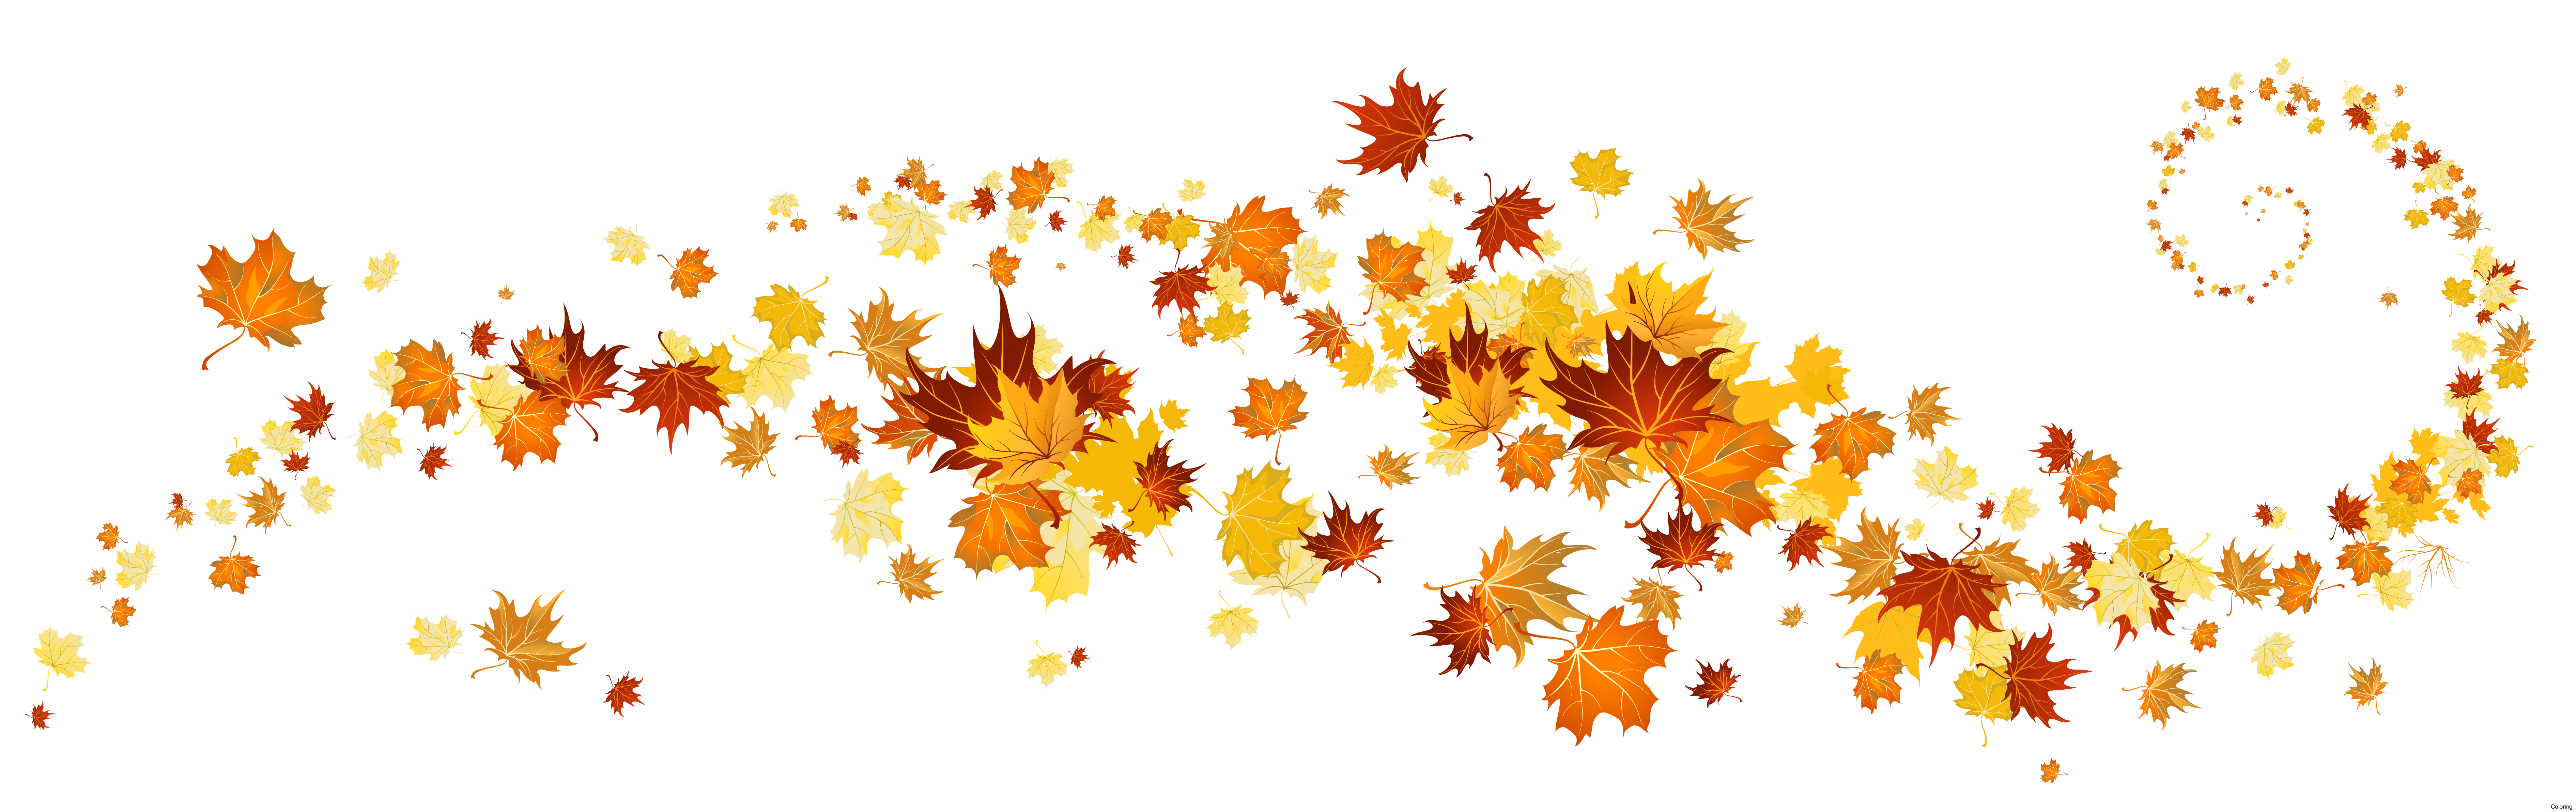 Free clipart fall.